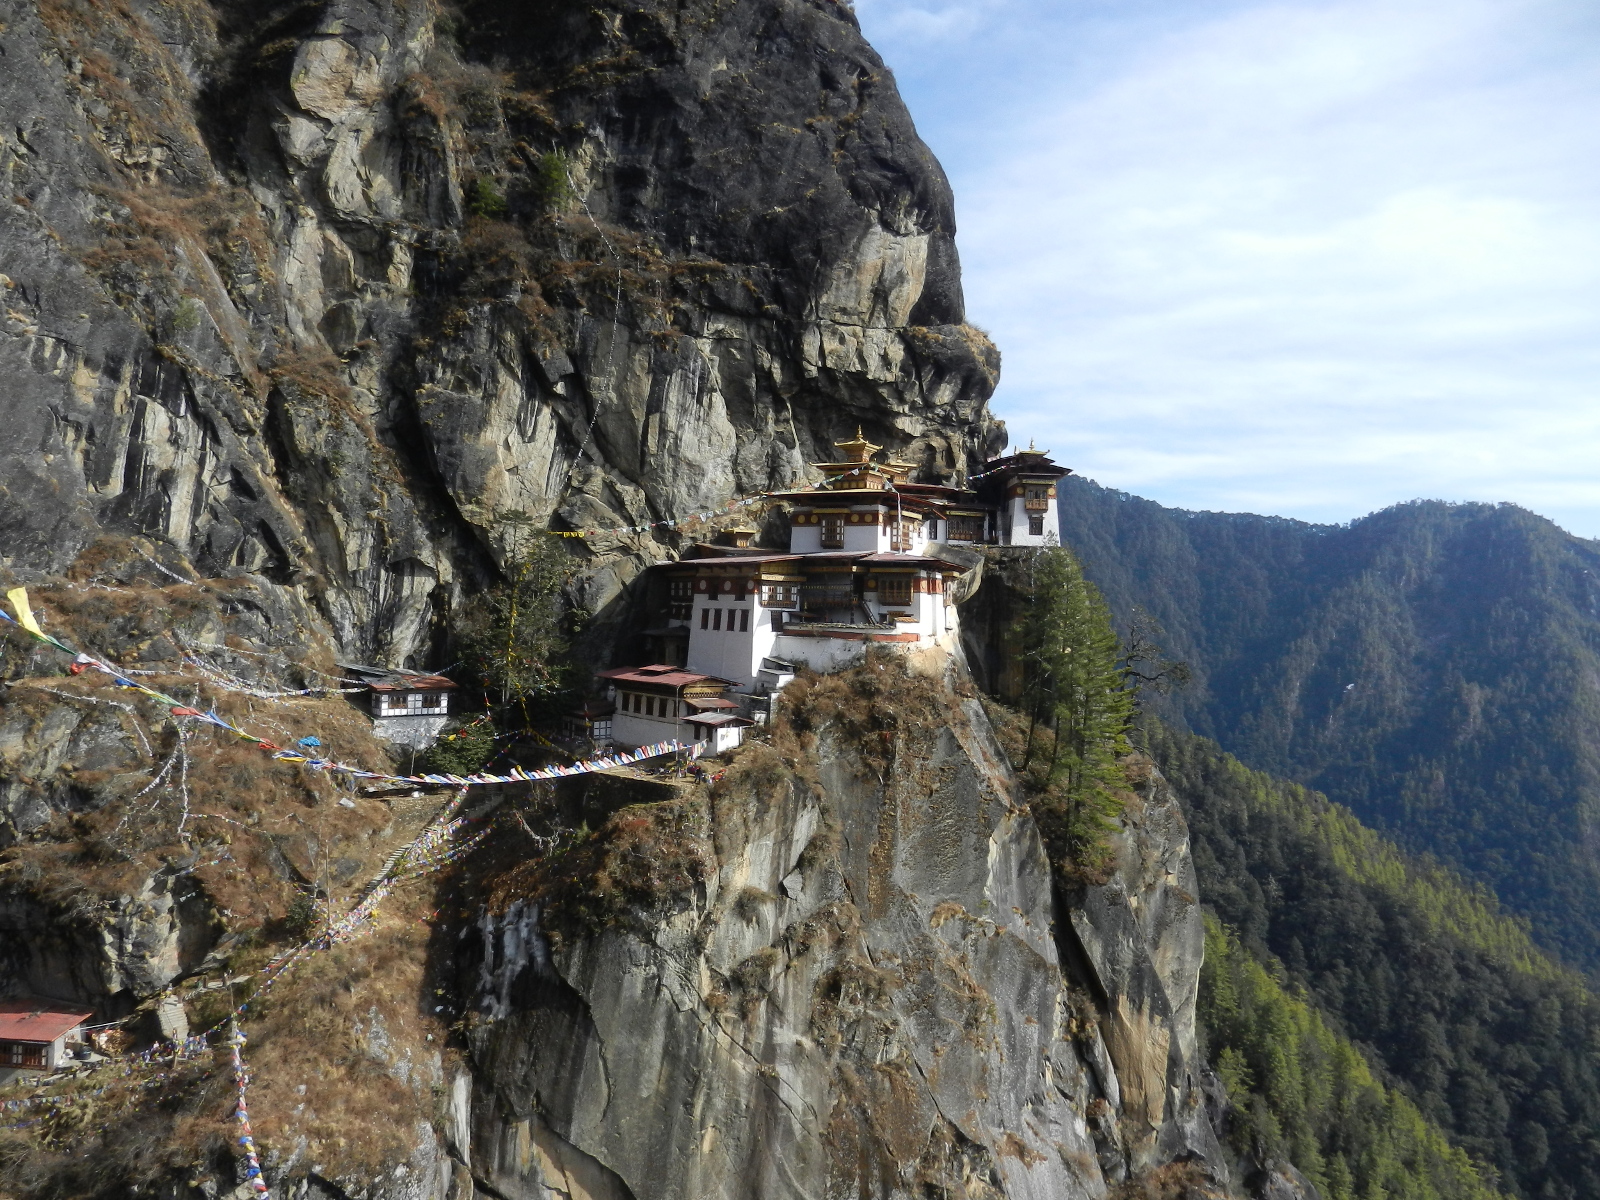 Taktsang Monastery with the steep drop in front - Tiger's nest